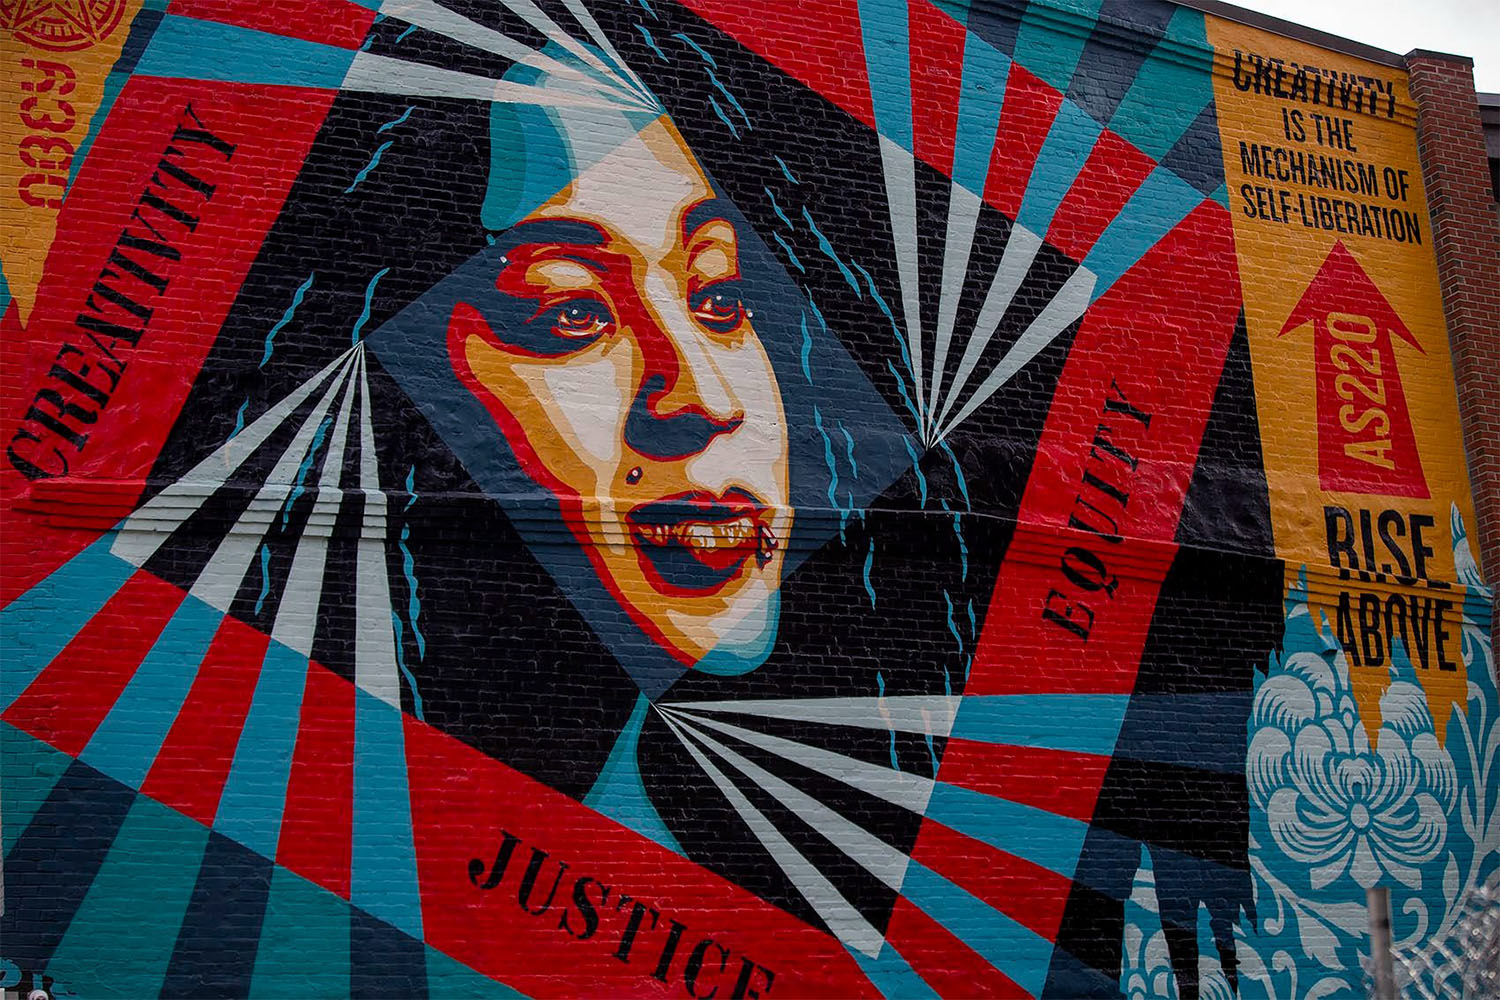 Shepard Fairey's "Creativity, Equity, Justice" mural in Providence, Rhode Island